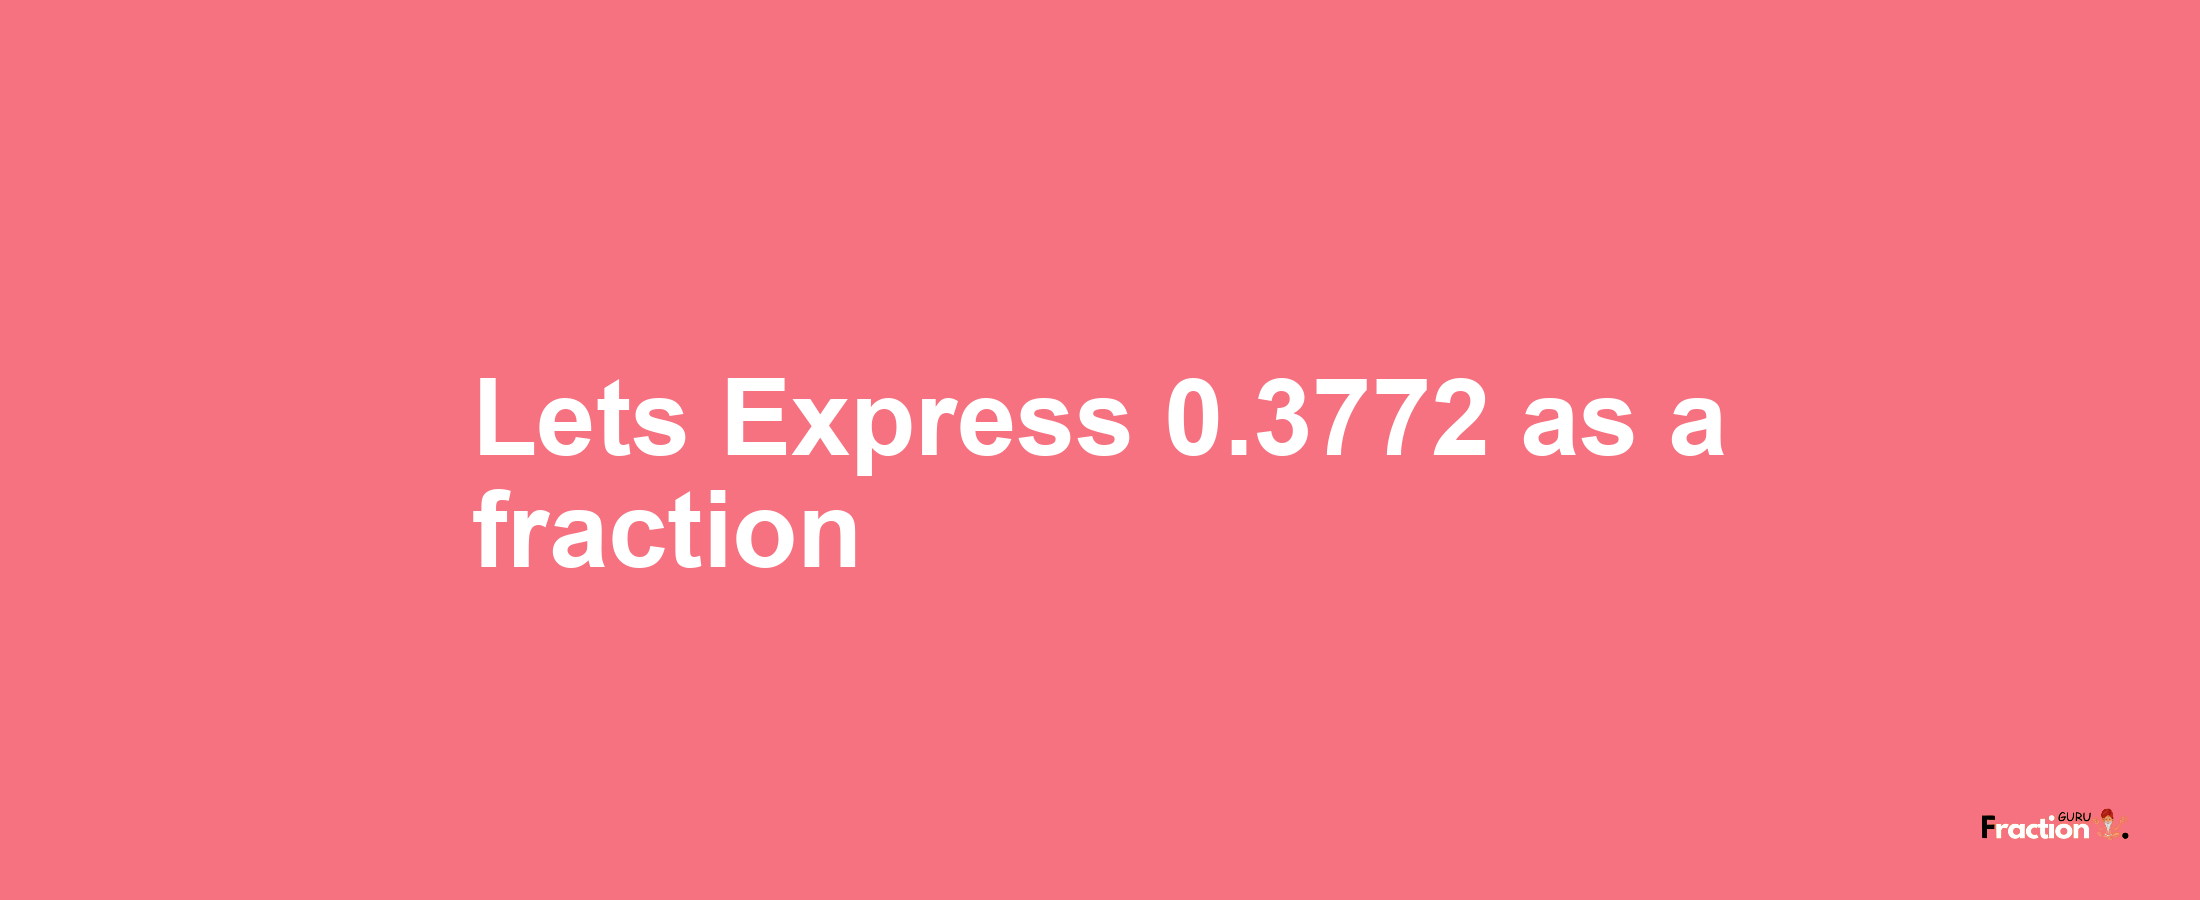 Lets Express 0.3772 as afraction